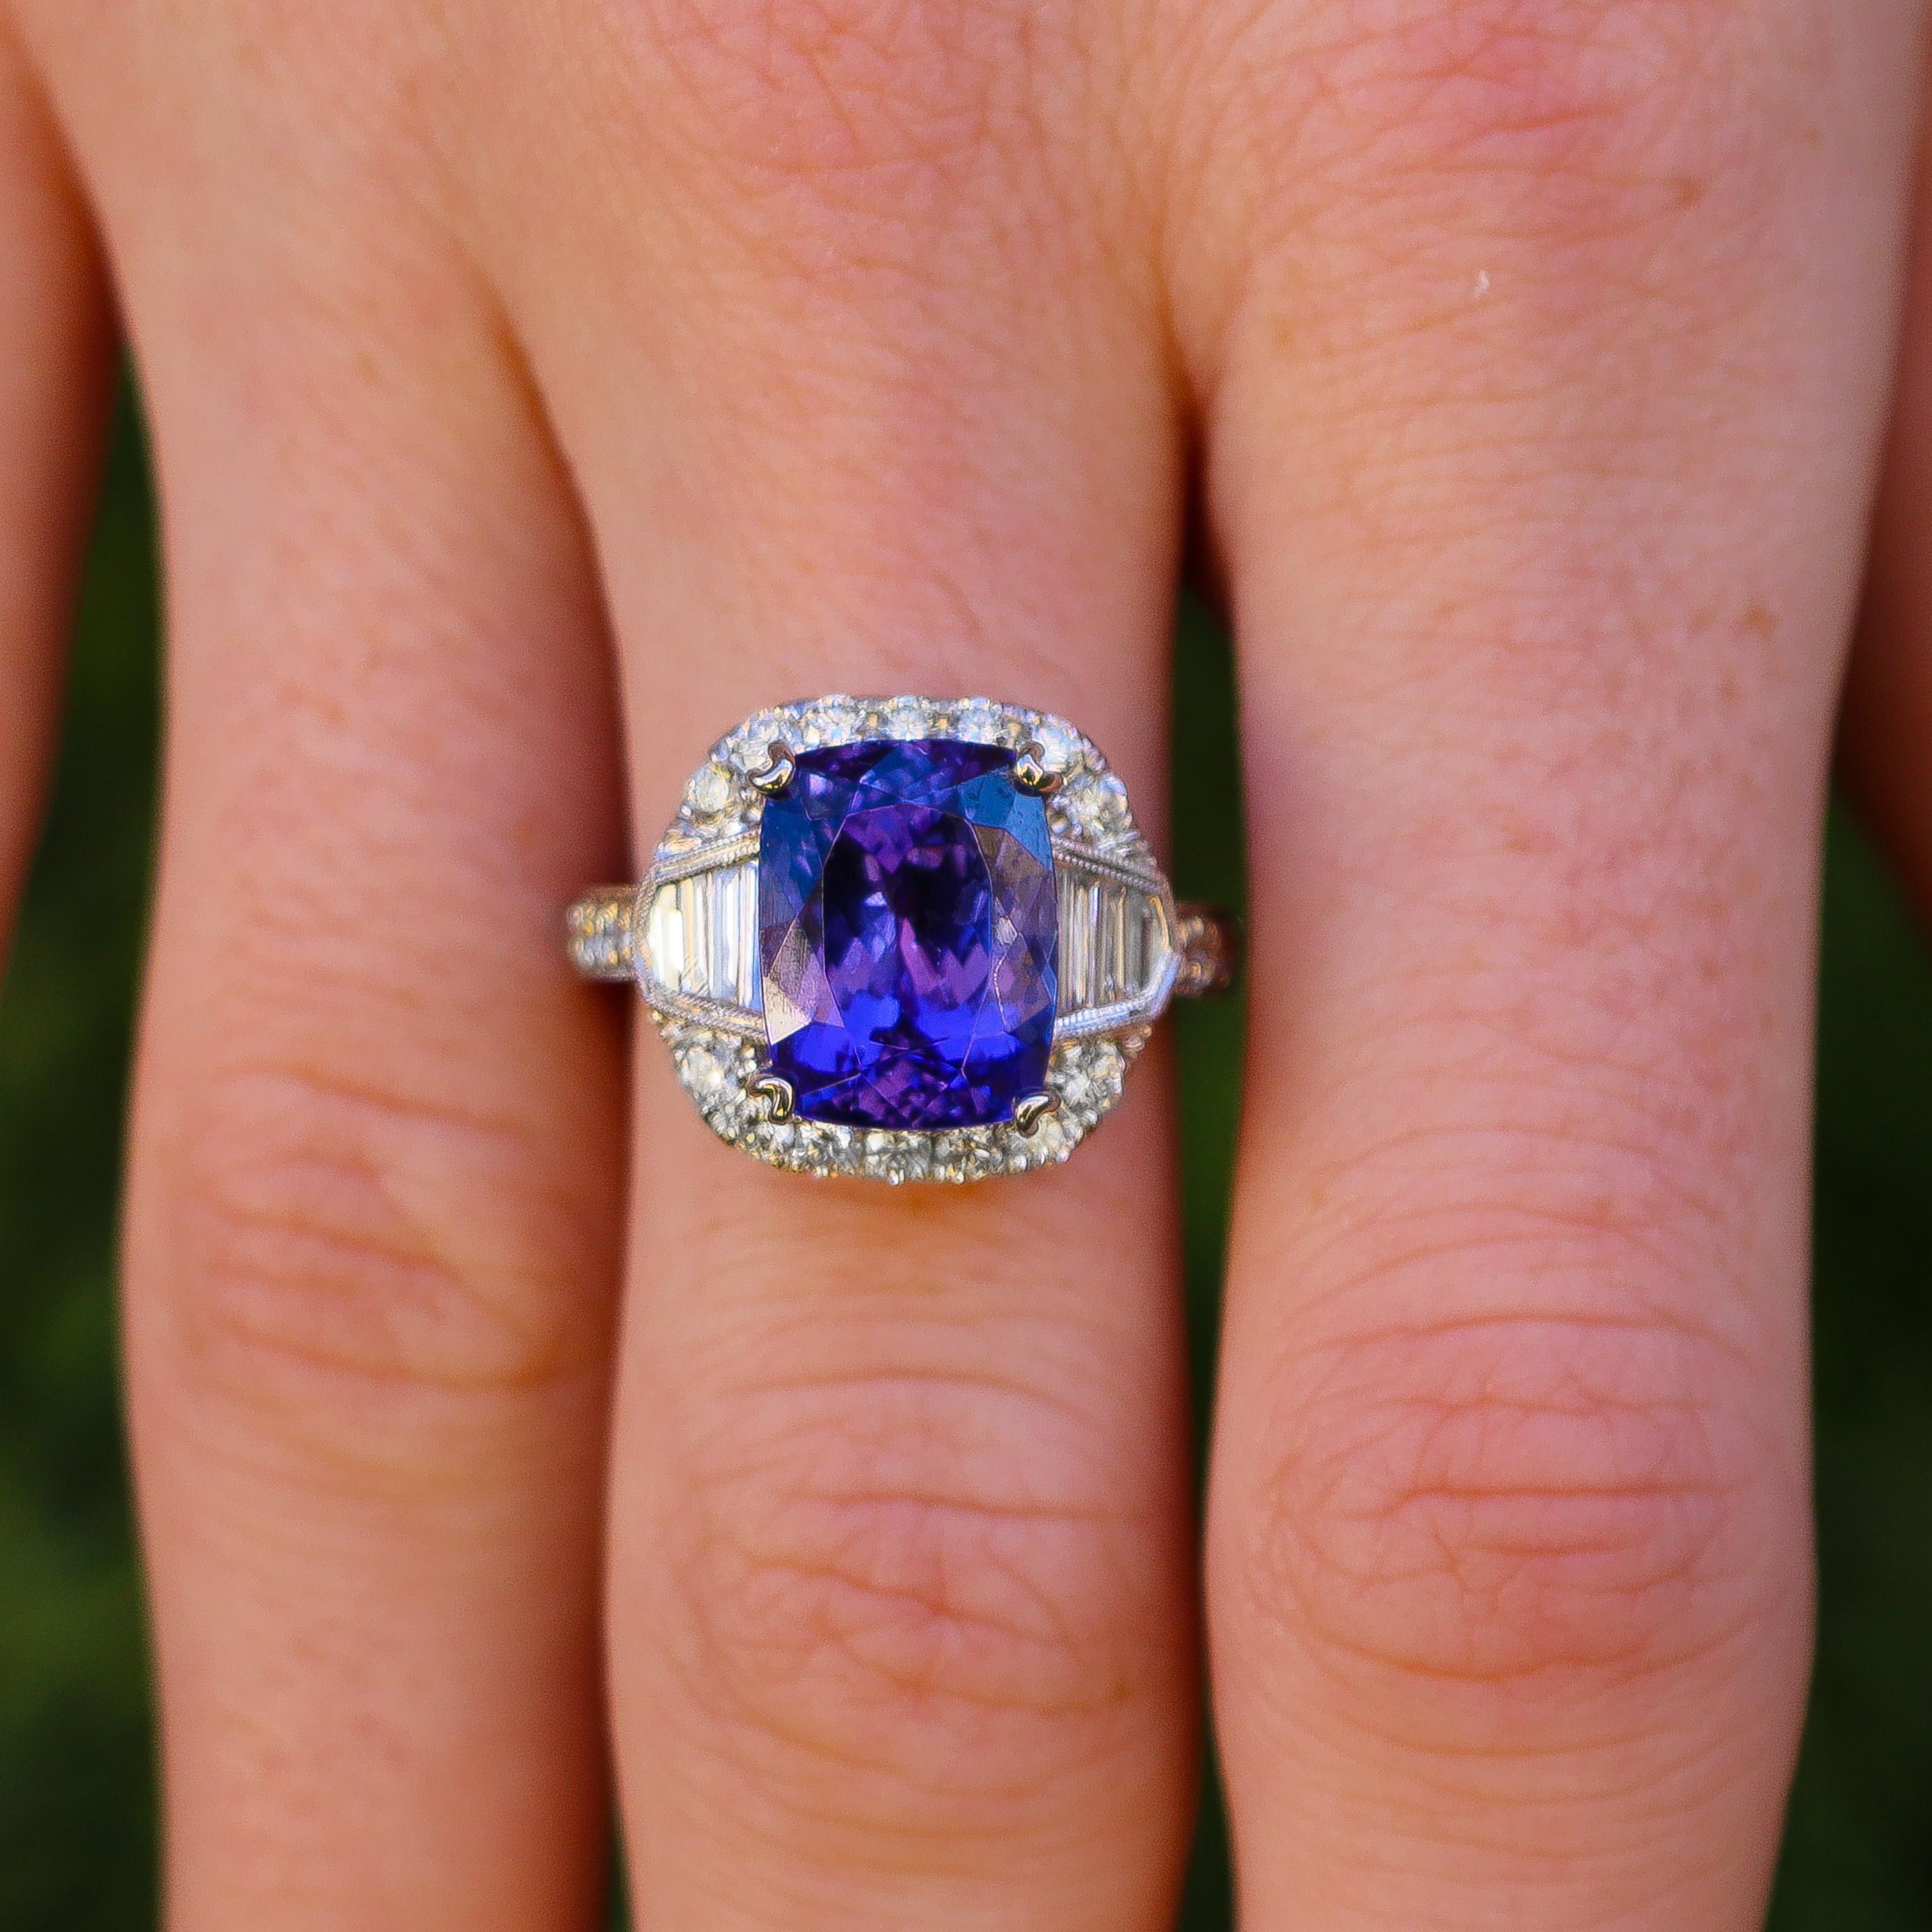 Tanzanite = 6.88 carats
Diamonds = 1.2 carats
( Color: F, Clarity: VS )
18K White Gold
Ring Size = 6
Complimentary Ring Sizing Available
Jewelry Gift Box Included